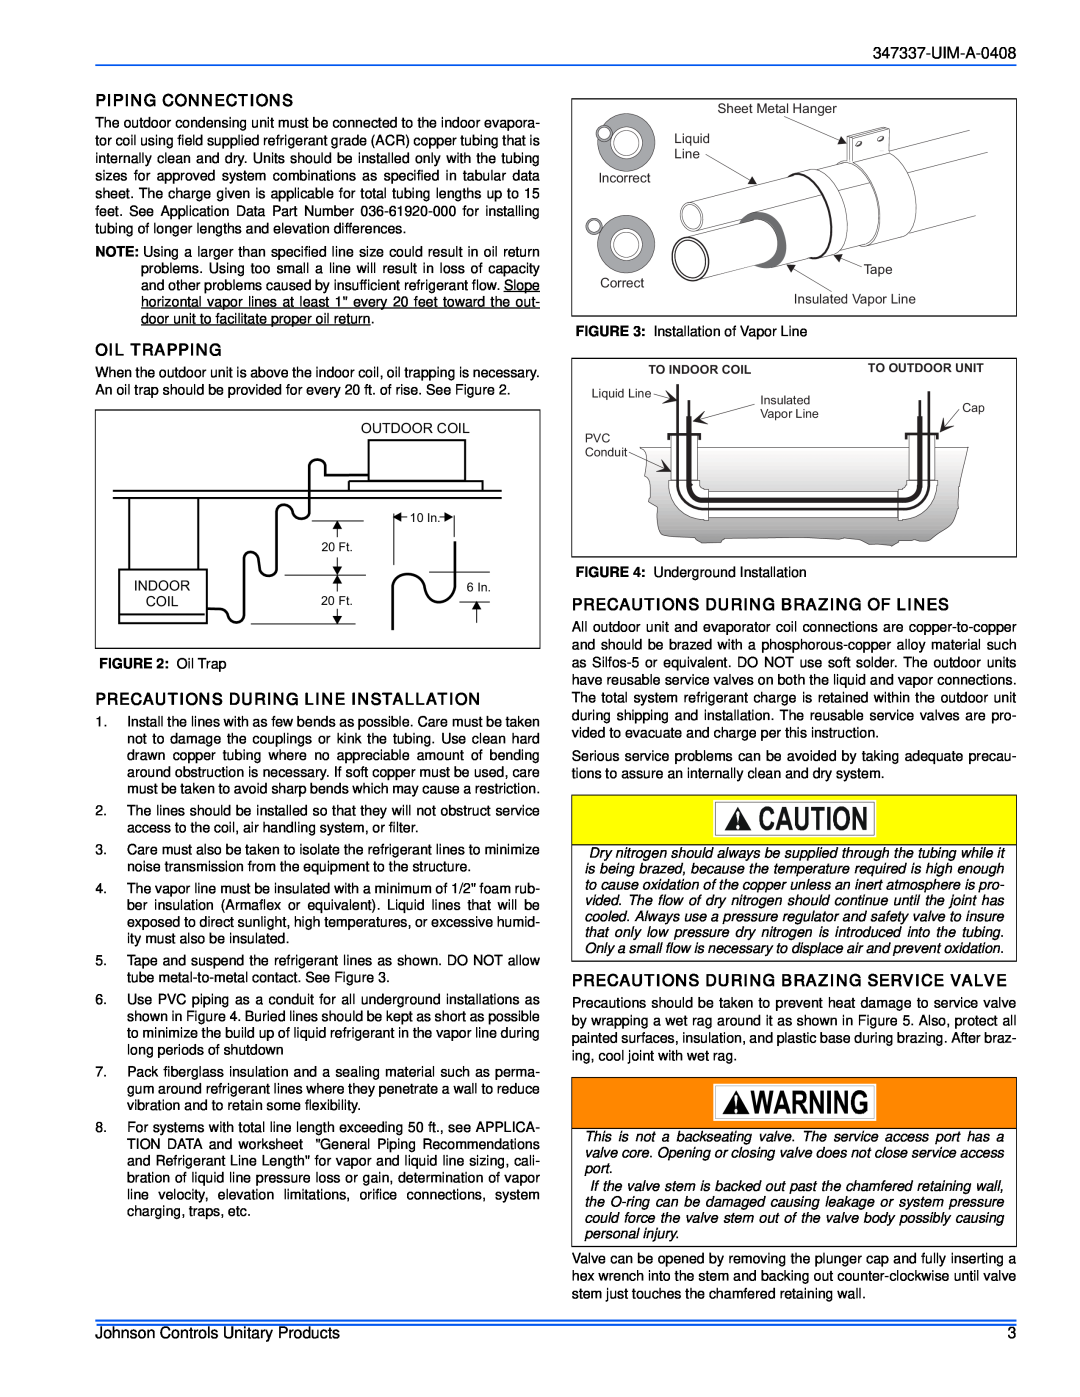 Johnson Controls 13 SEER Piping Connections, Oil Trapping, Precautions During Line Installation, UIM-A-0408 